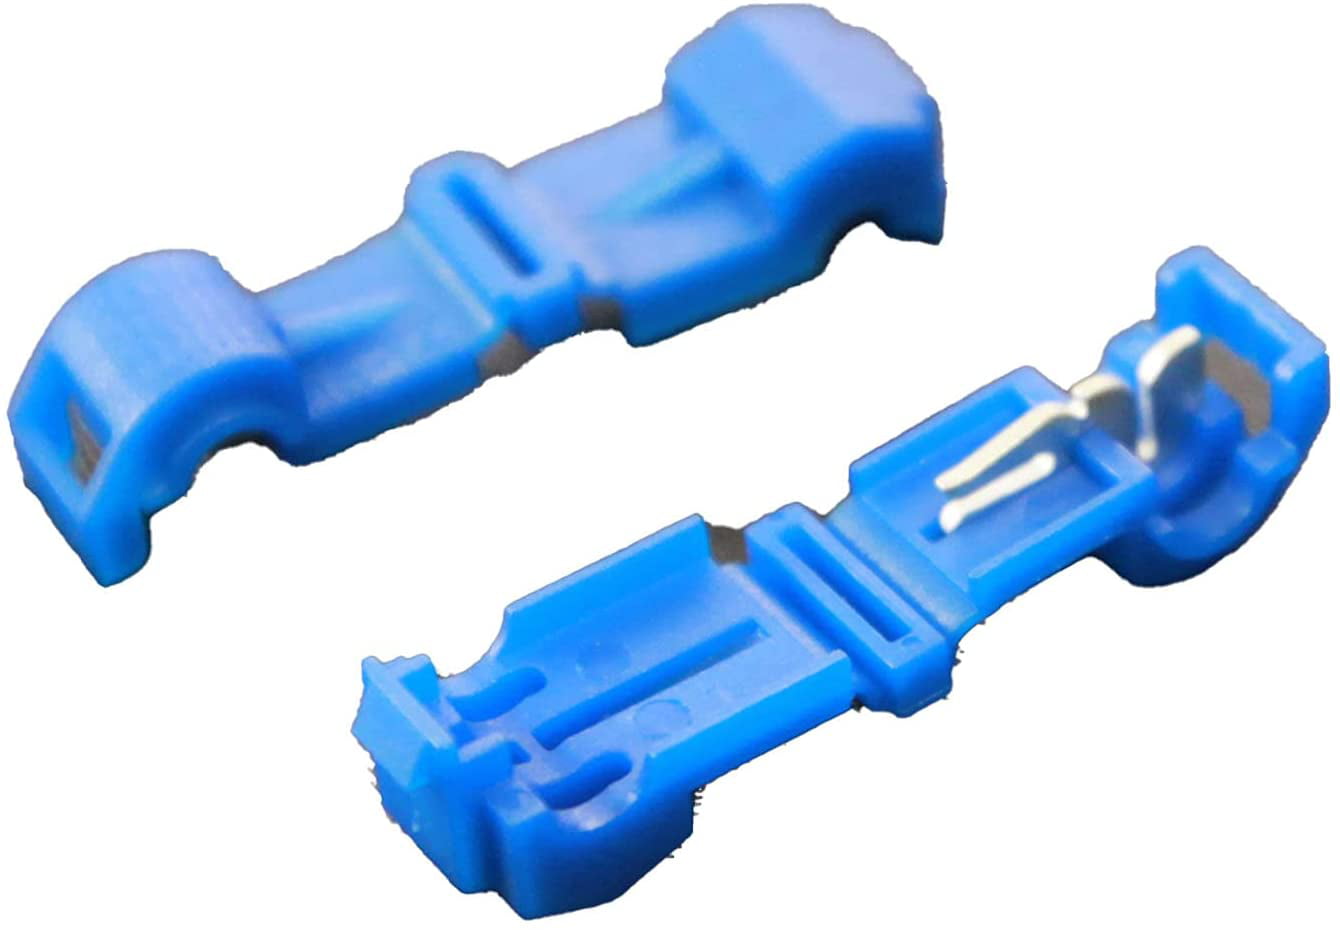 100 MALE/FEMALE QUICK ELECTRICAL WIRE SPLICE CONNECTORS BLUE 16-14 GAUGE *USA* 